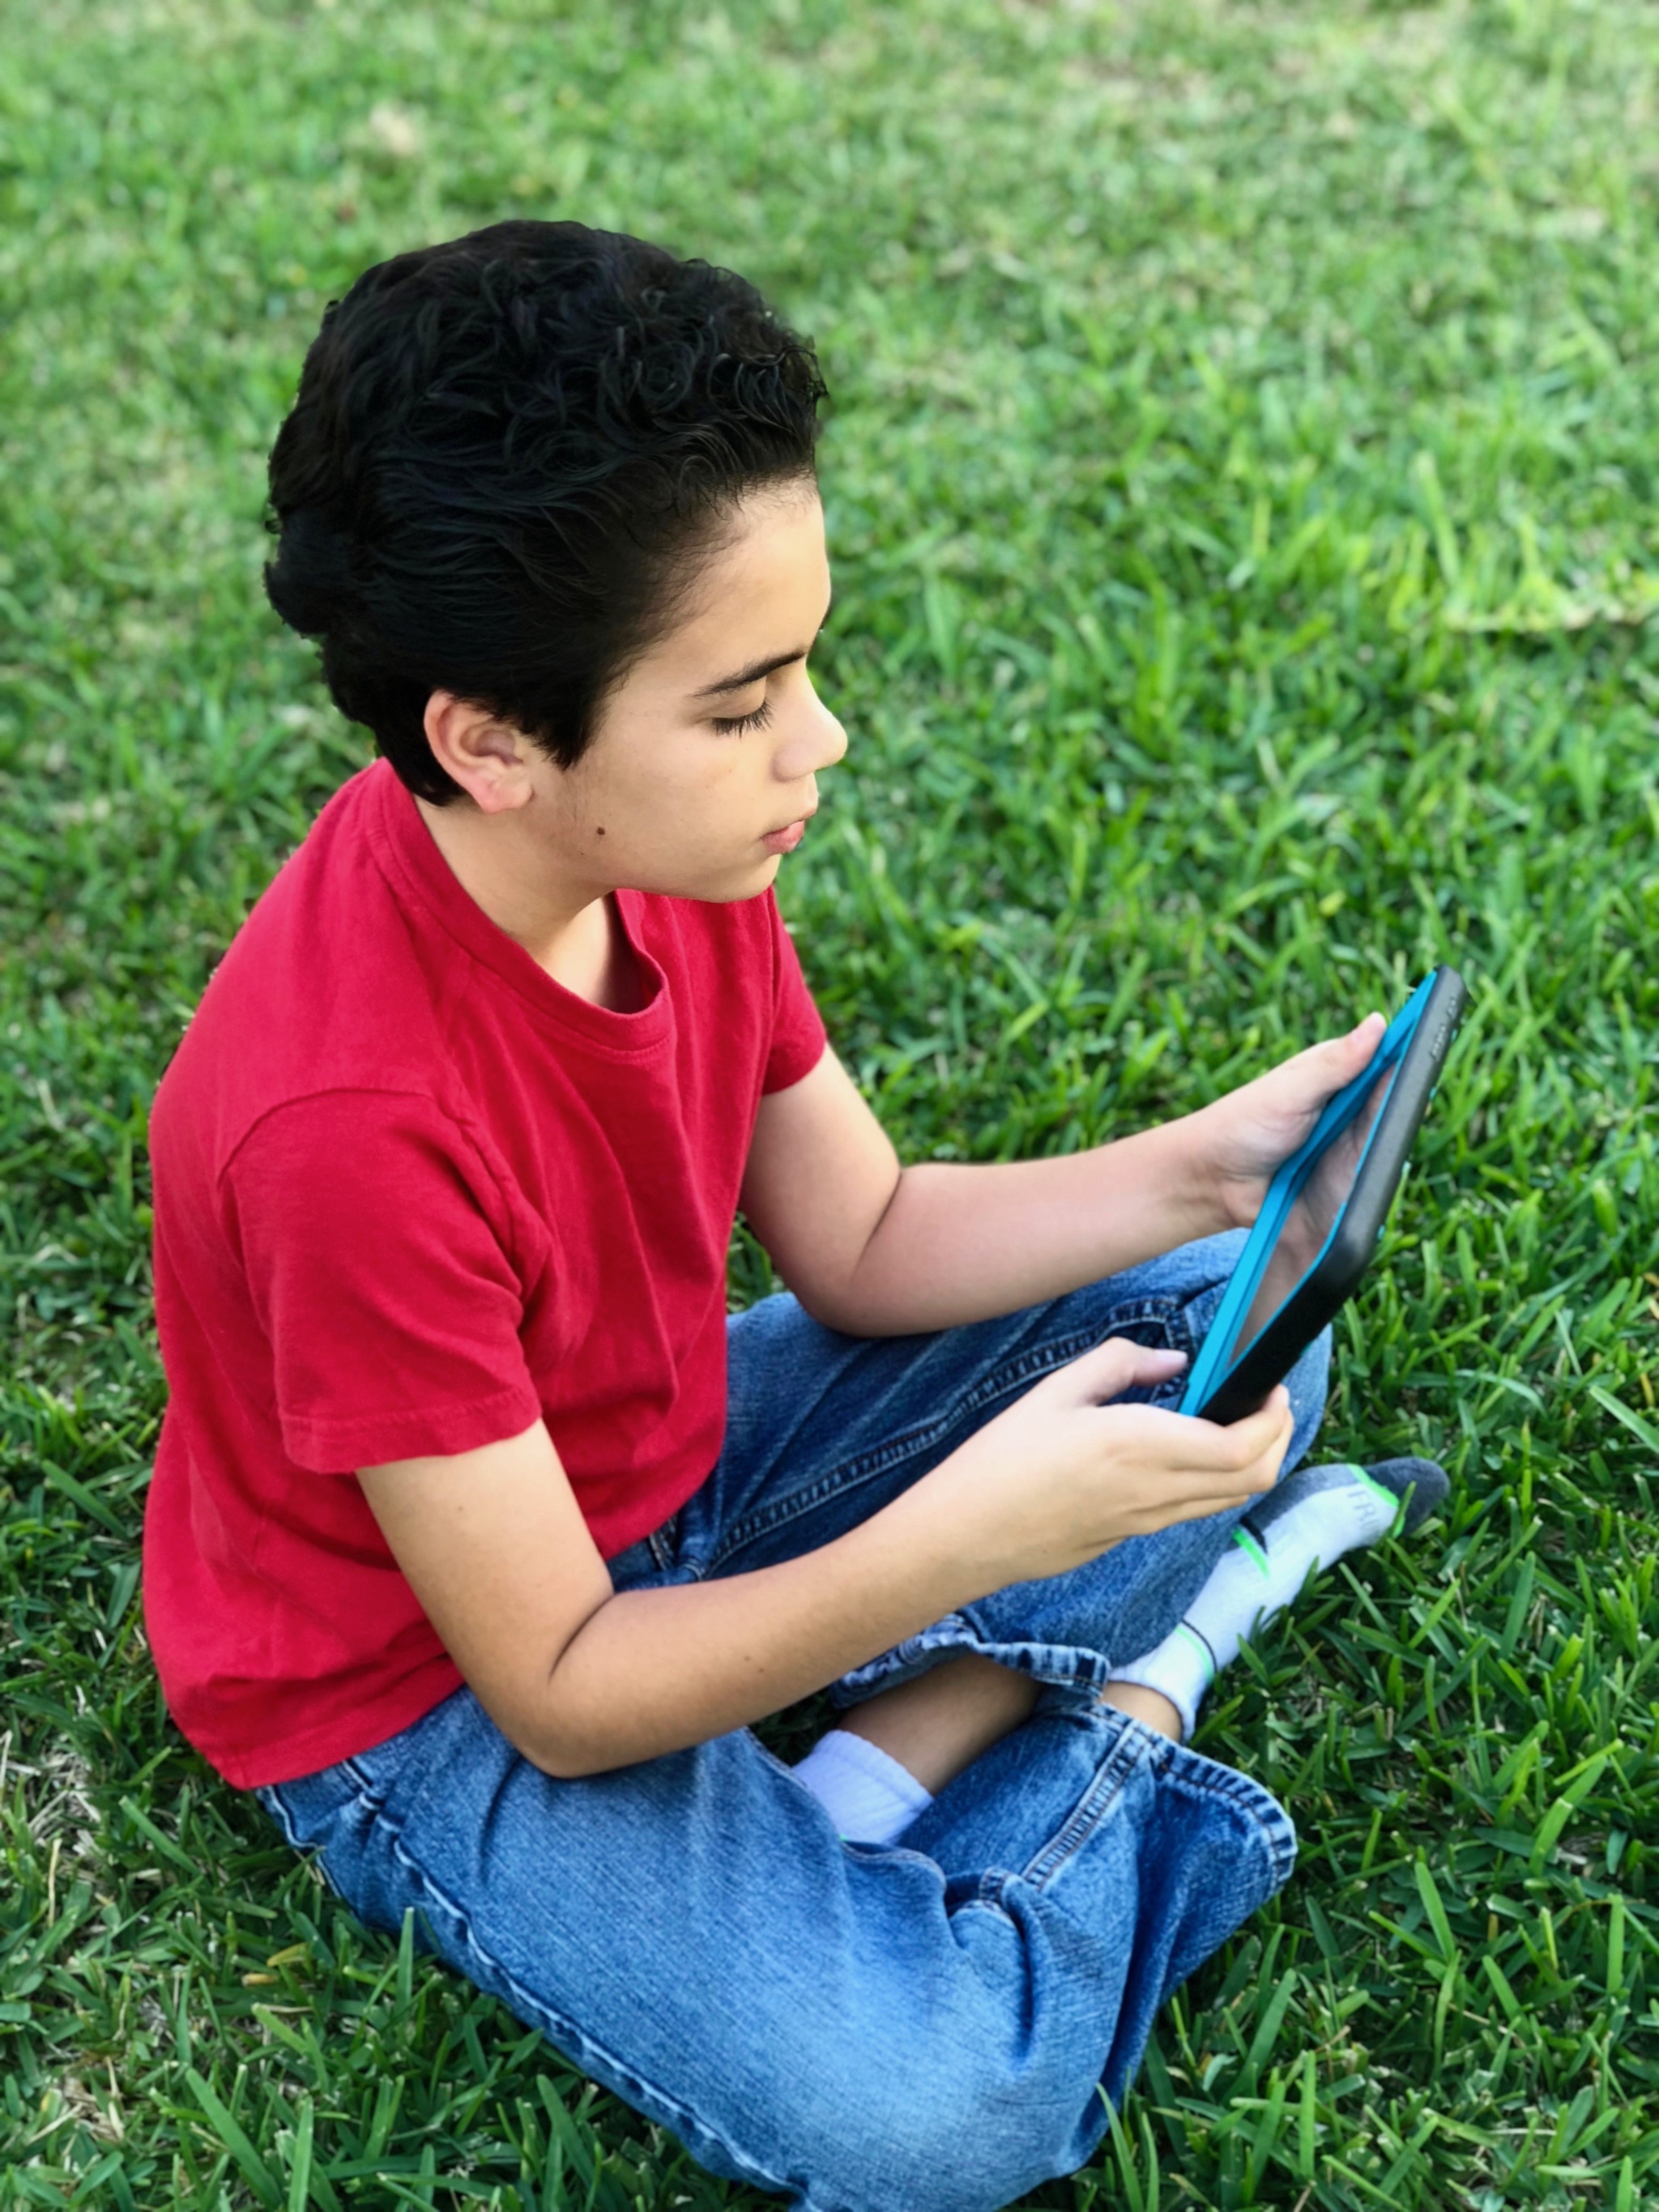 Tips for Talking To Your Kids About Online Safety